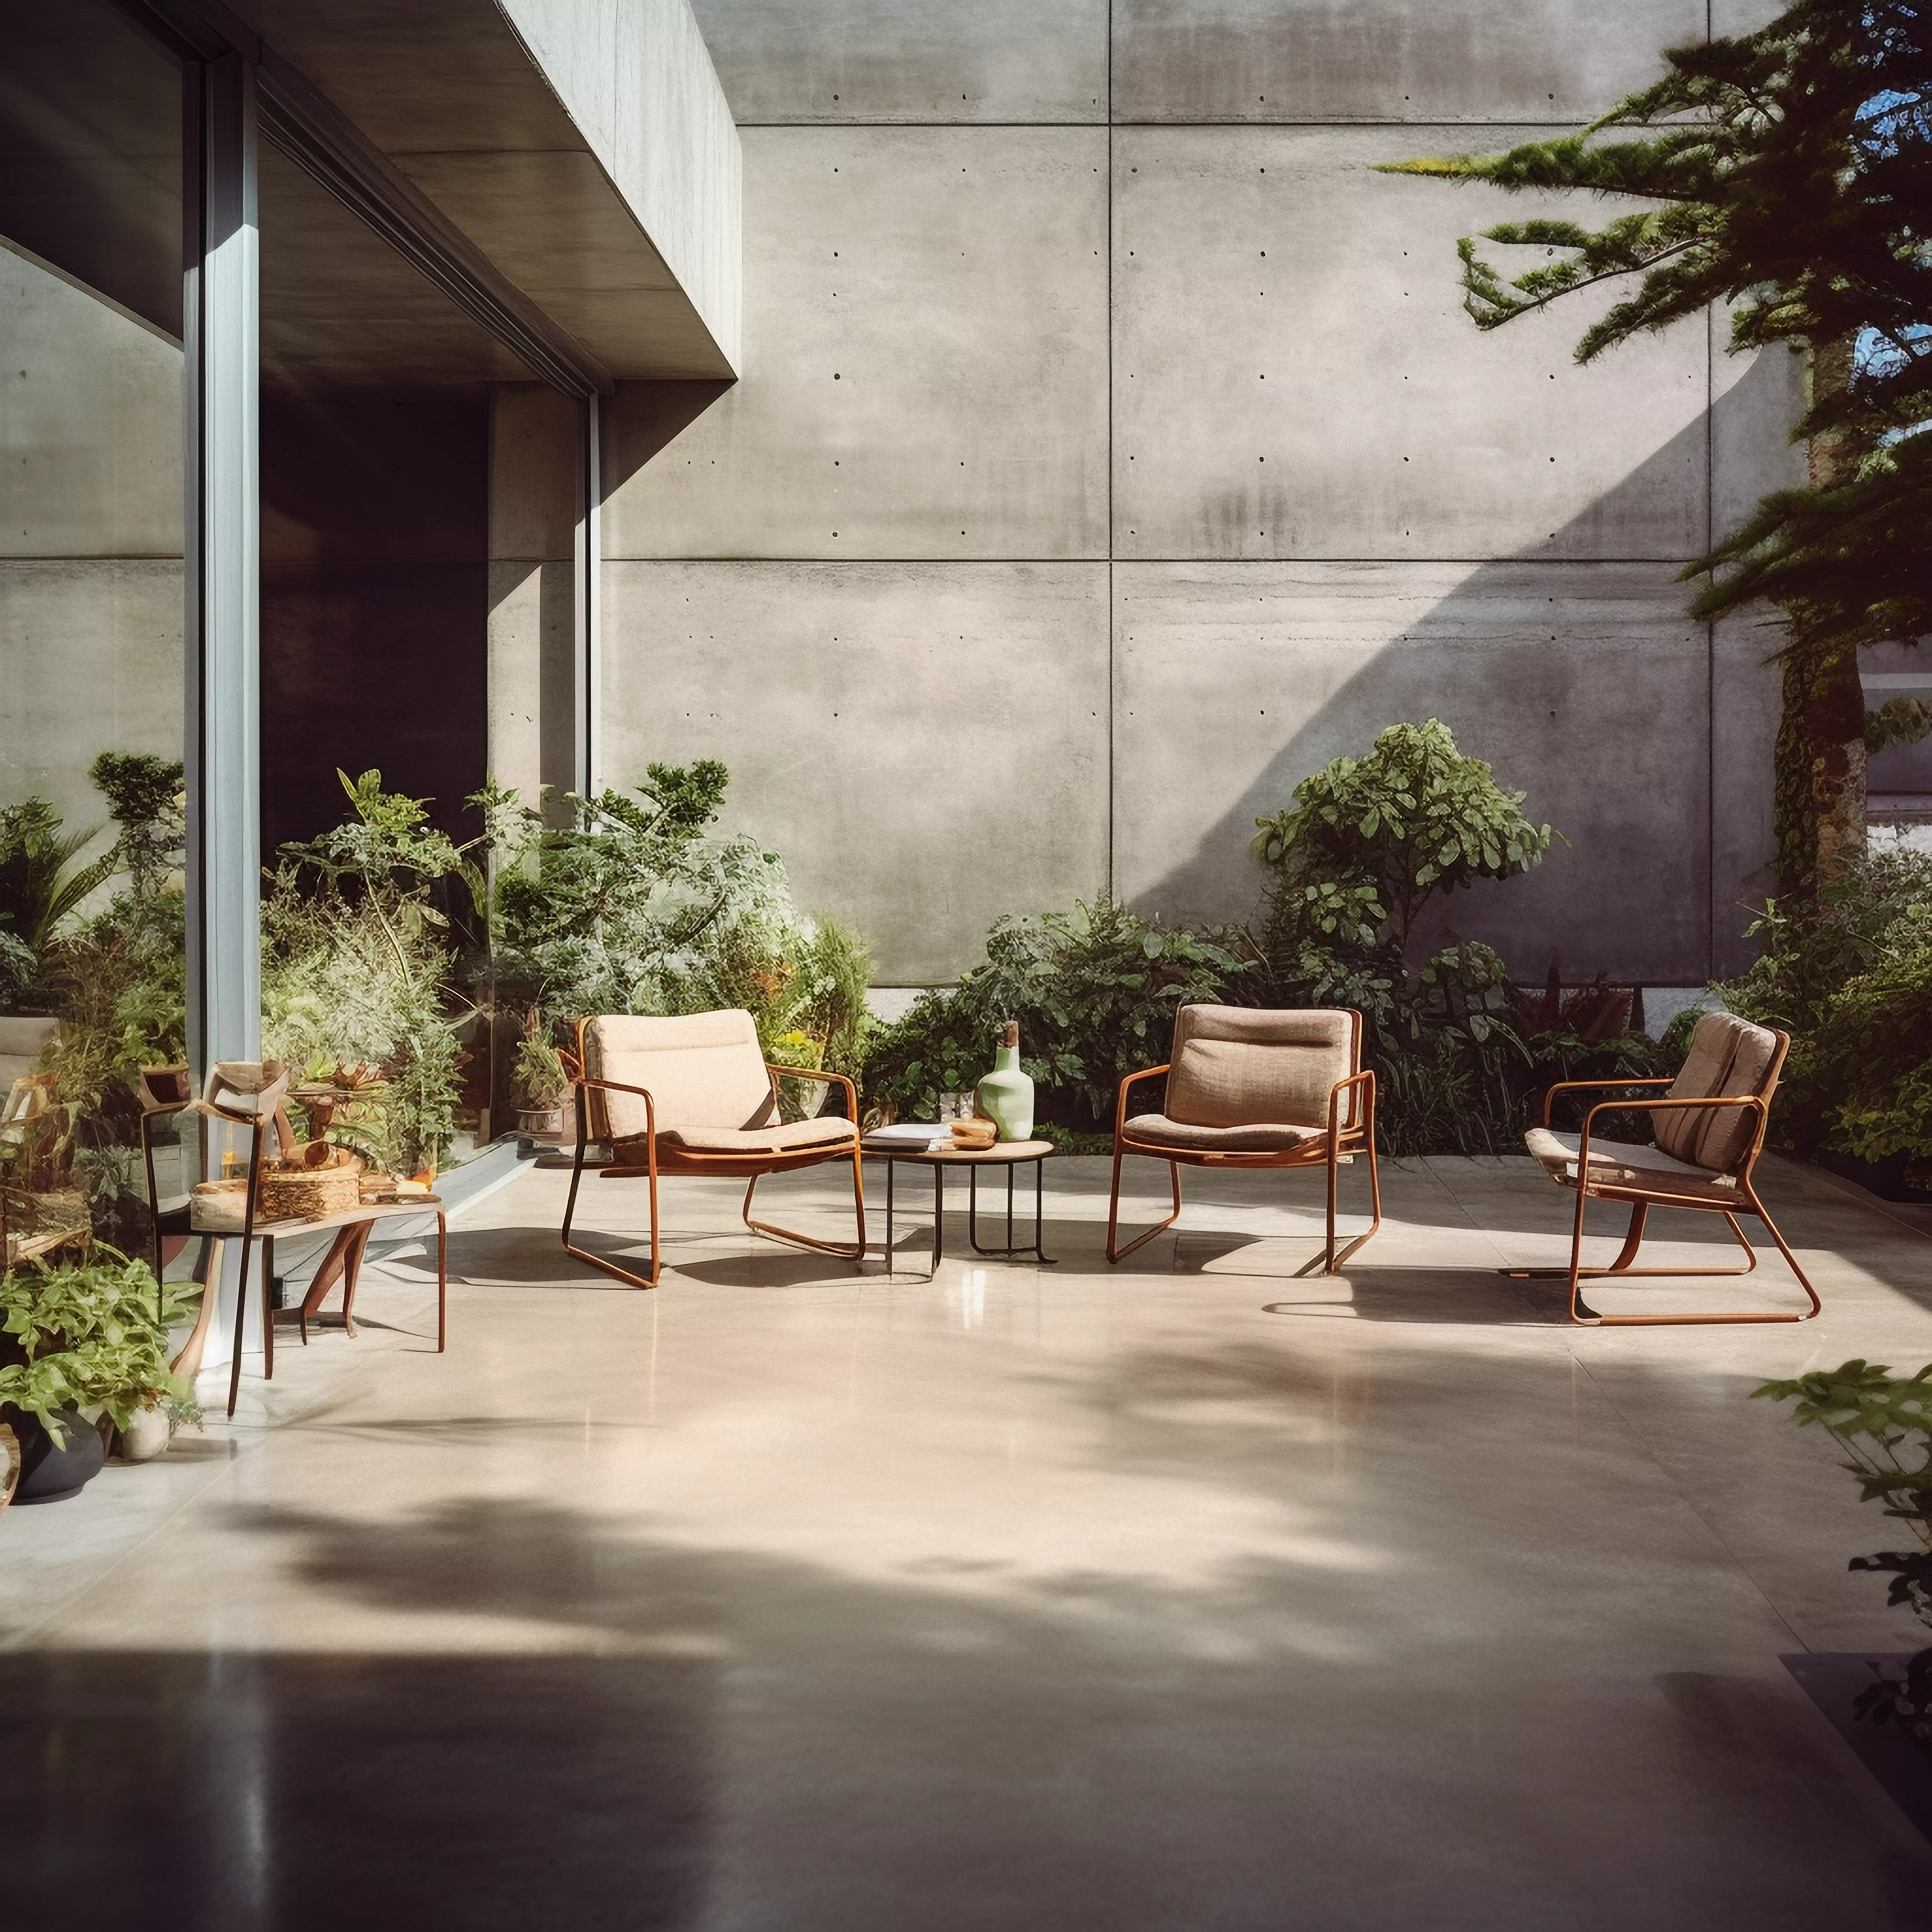 Scene of concrete patio outdoors with nice side sunlight.